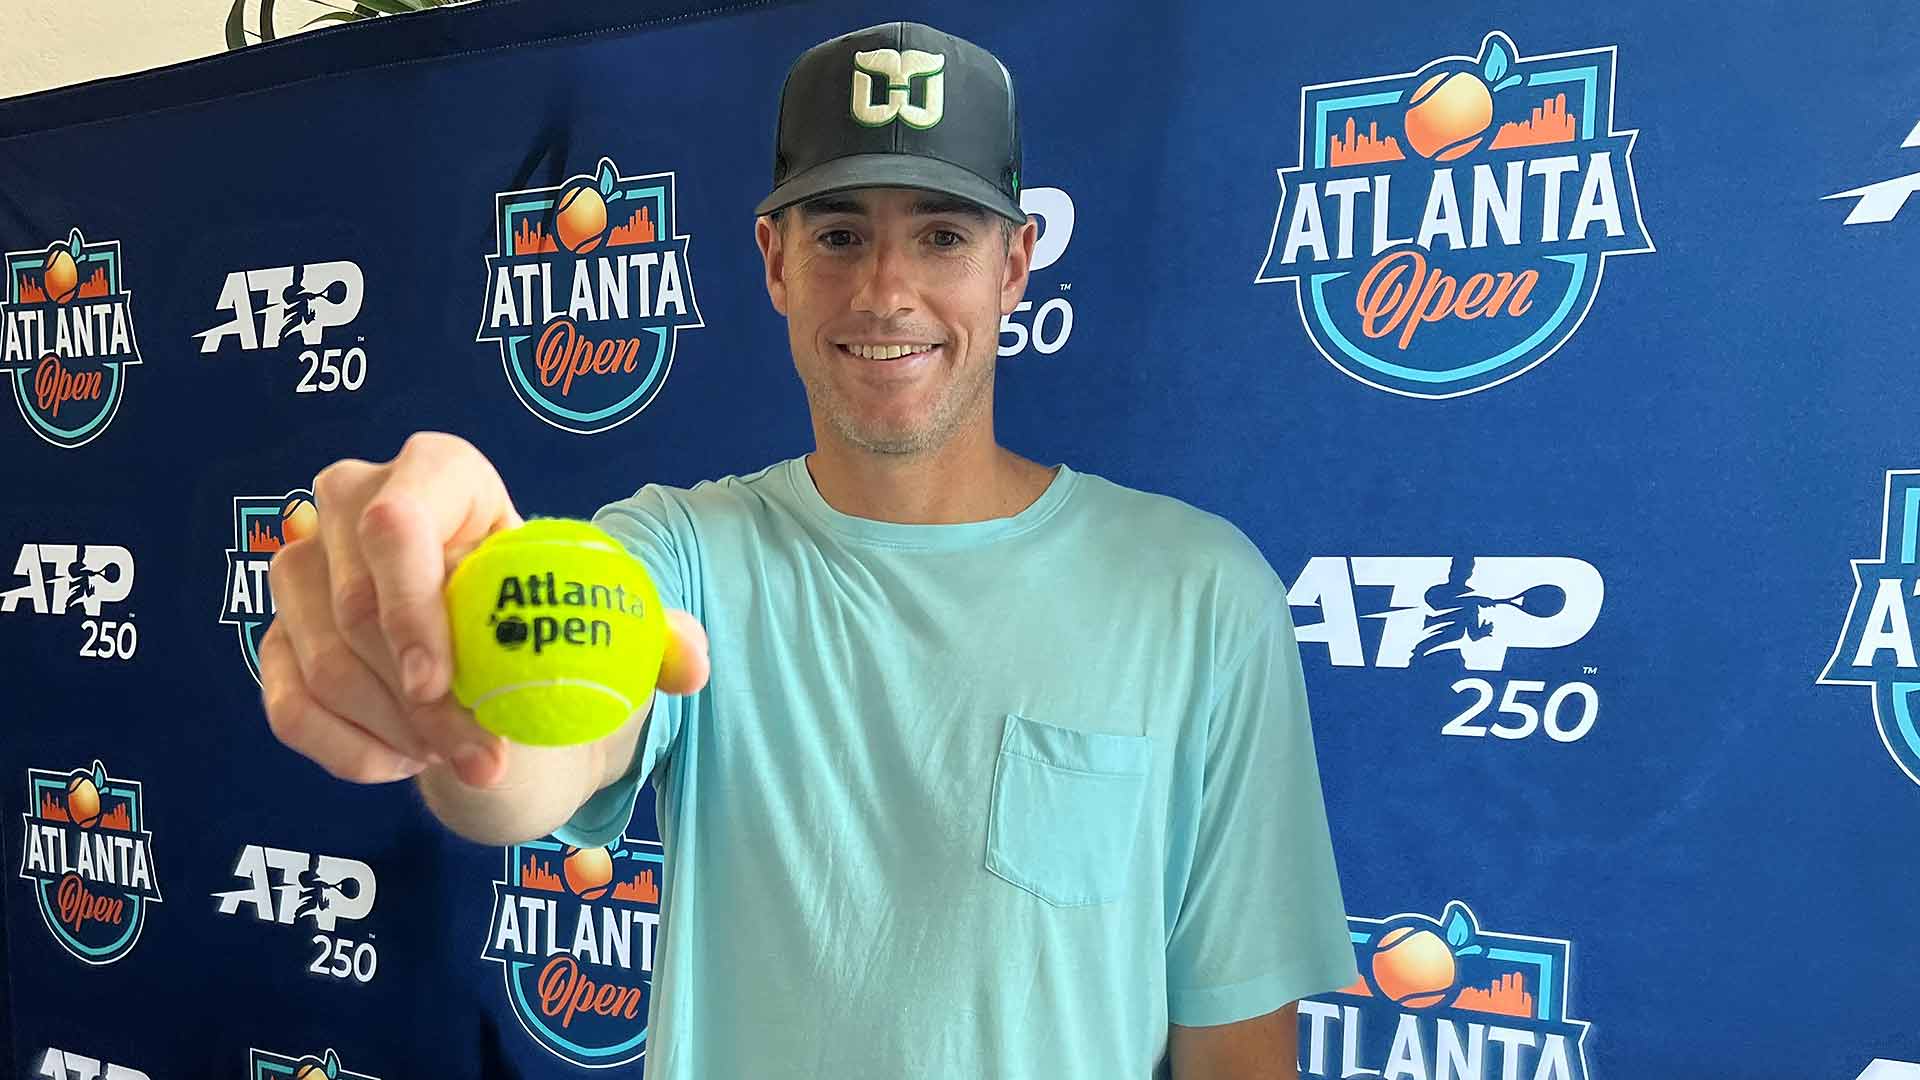 John Isner has played in all 12 editions of the Atlanta Open.